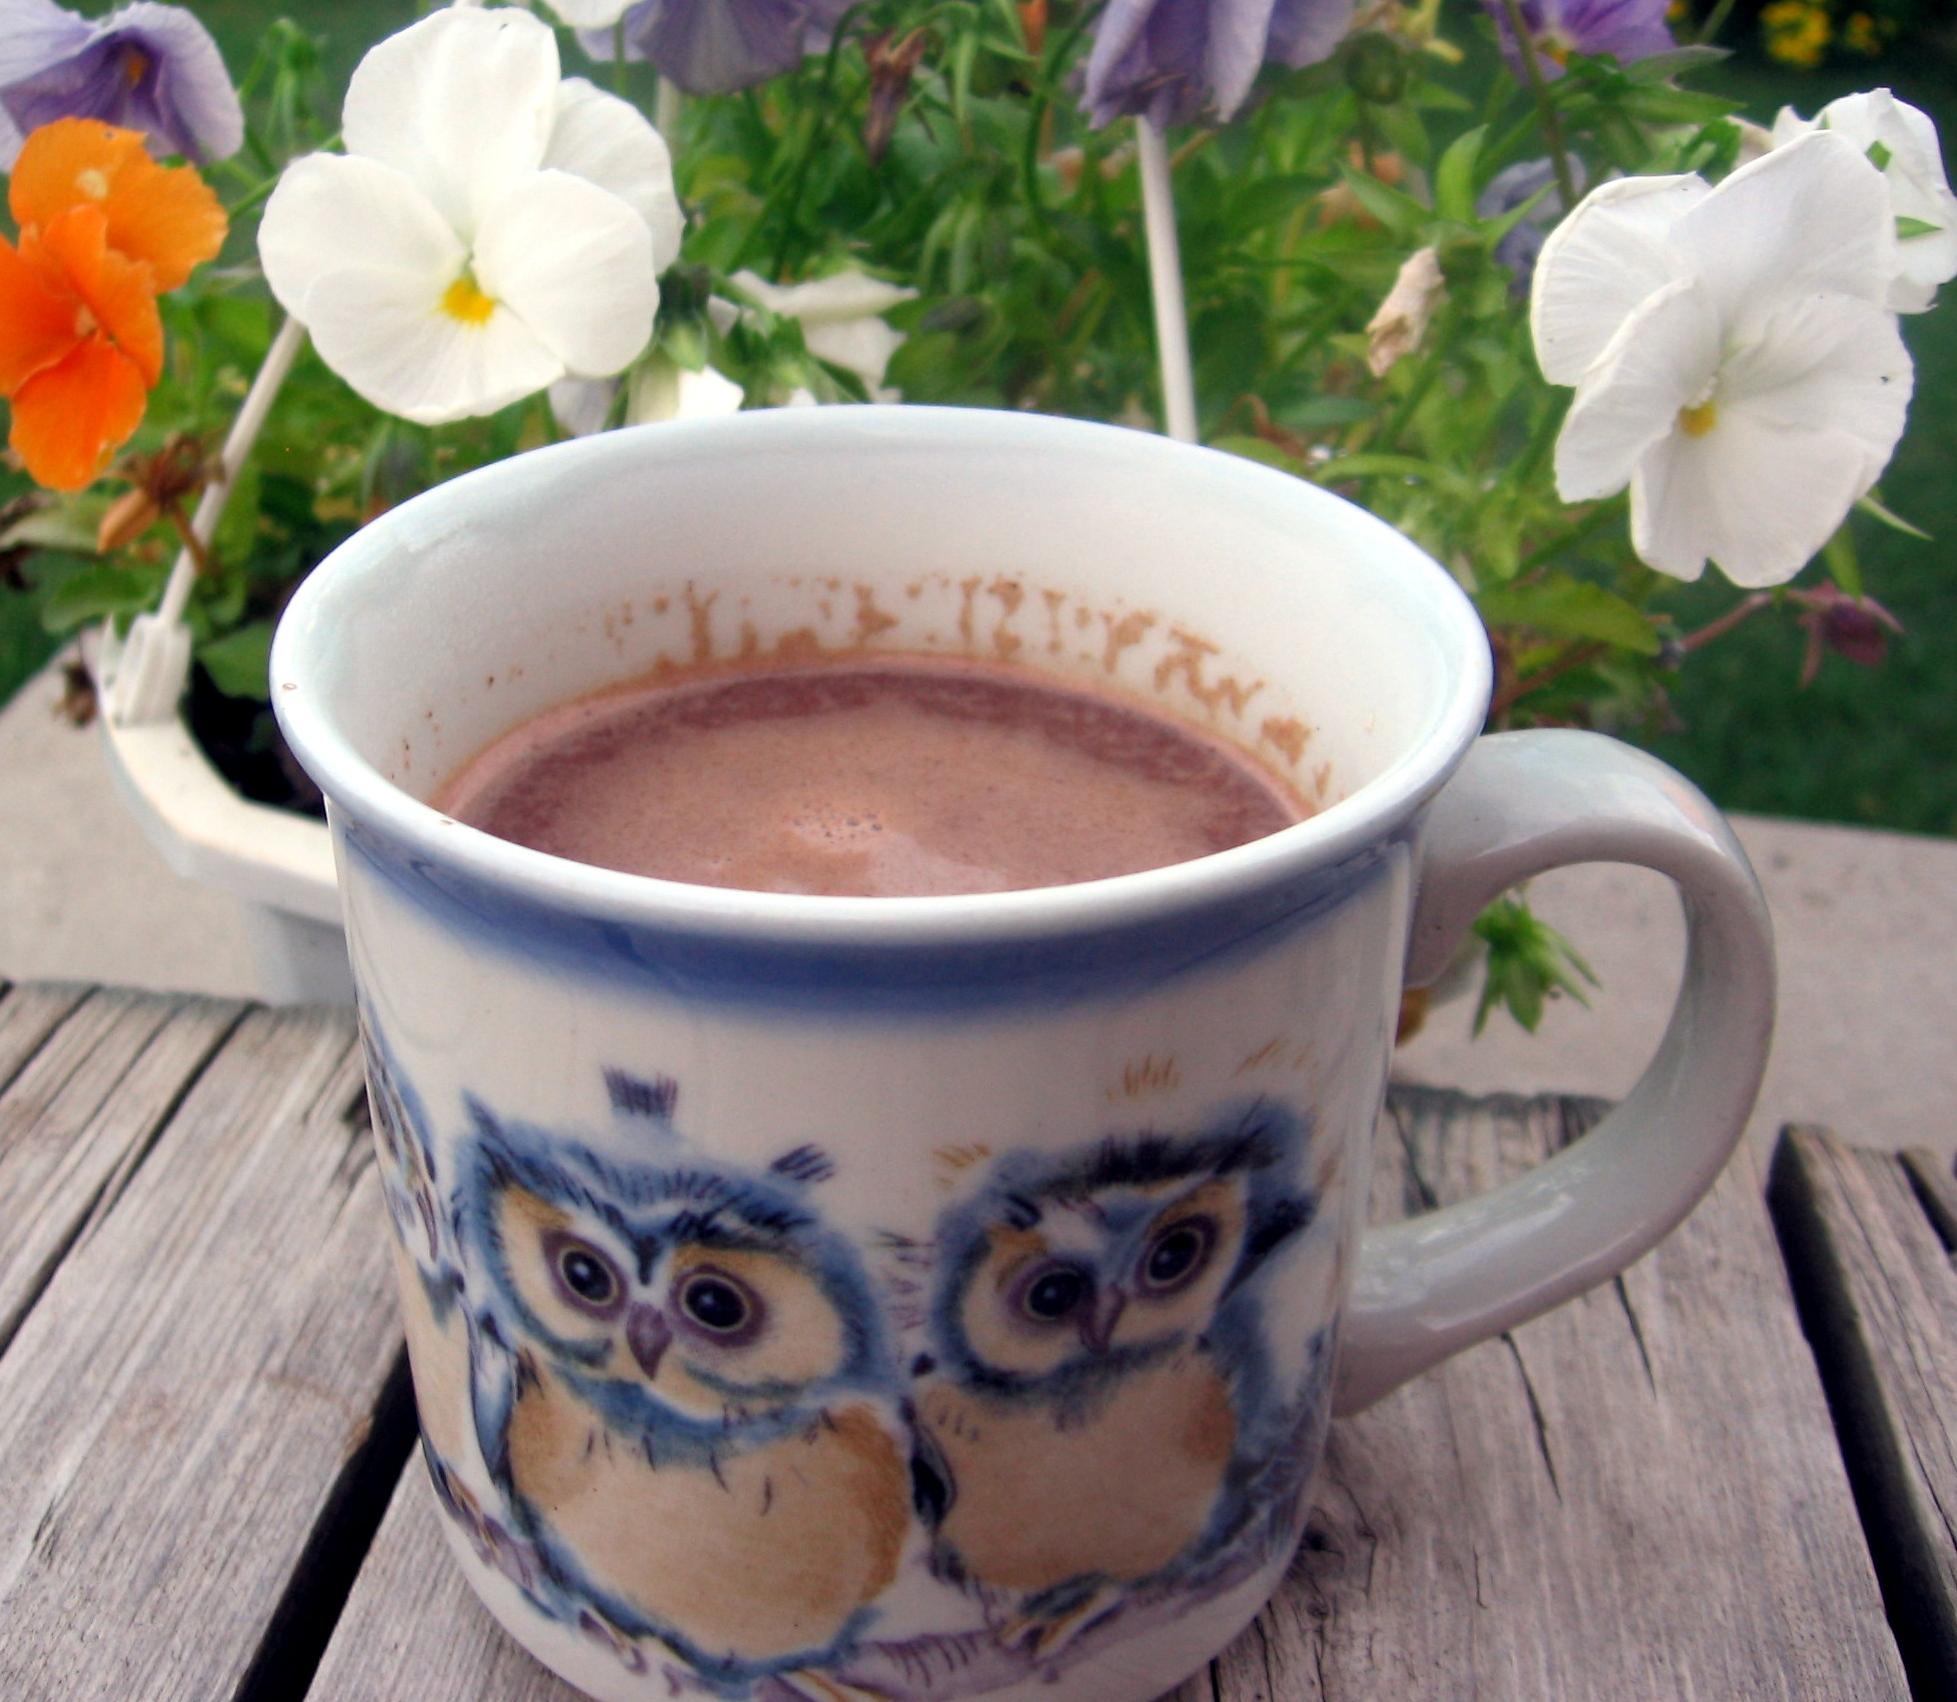  Satisfy your chocolate cravings with this creamy Brazilian hot chocolate!